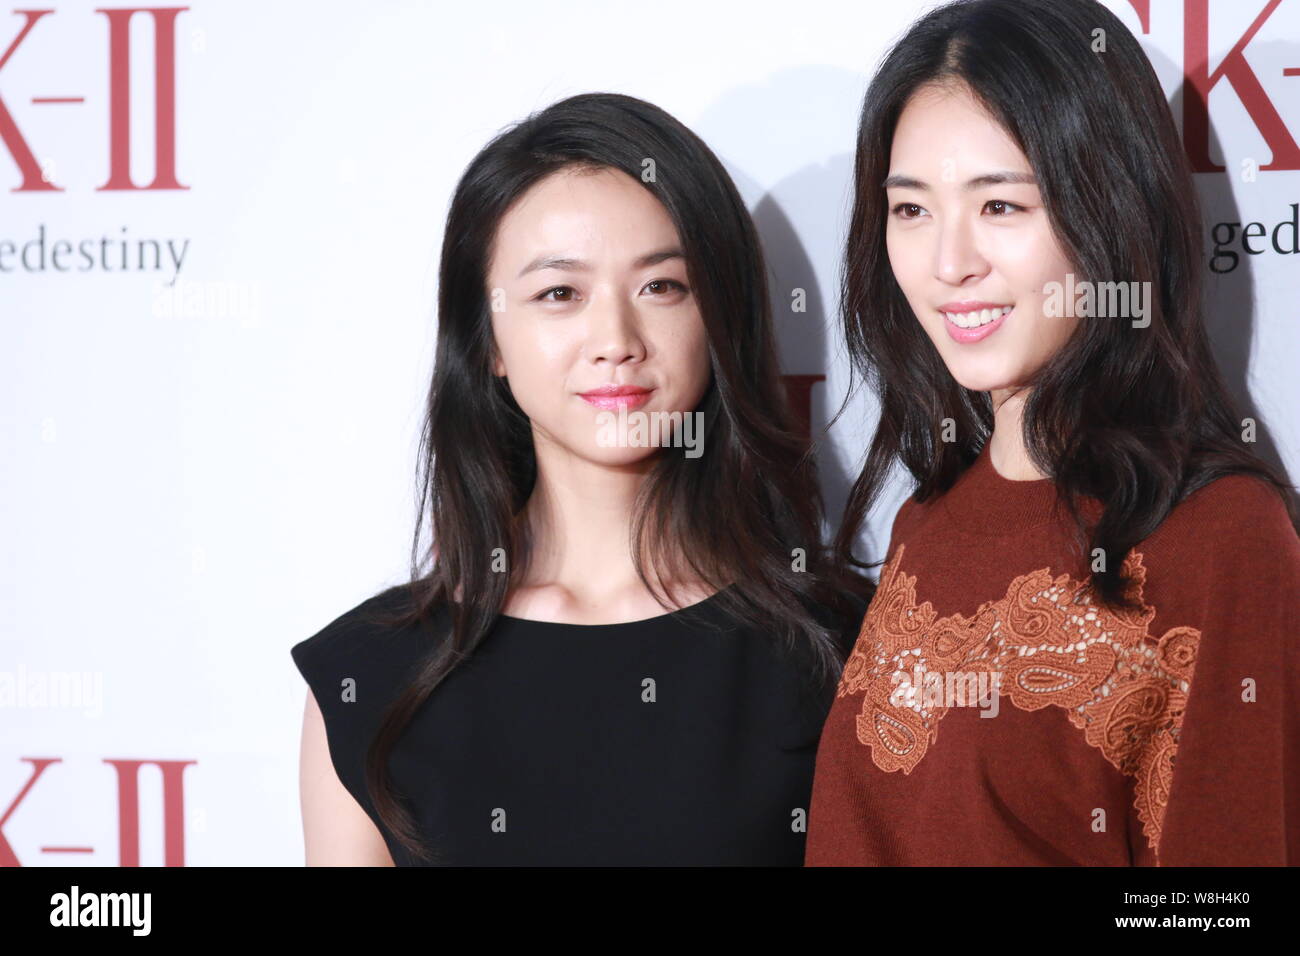 Chinese actress Tang Wei, left, and South Korean actress Lee Yeon-hee attend a promotional event for SK-II cosmetics in Seoul, South Korea, 3 Septembe Stock Photo